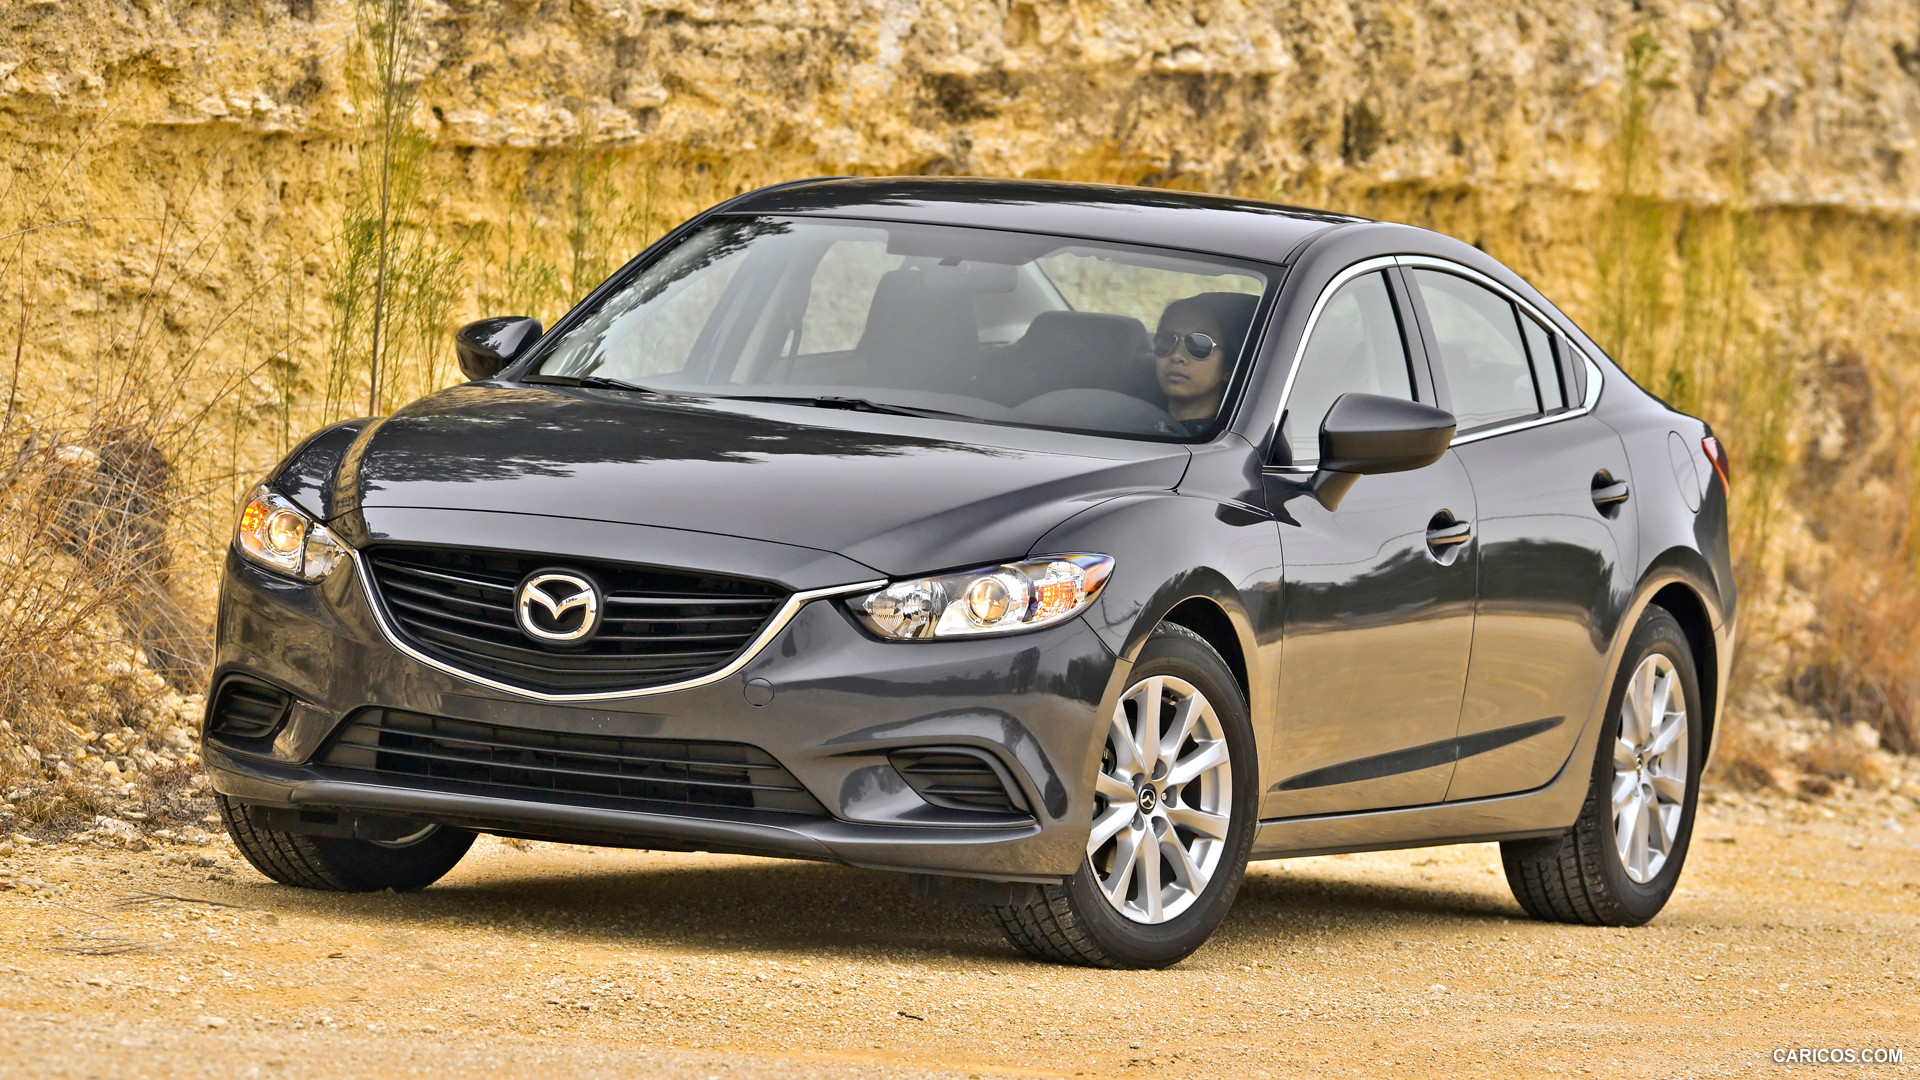 2014 Mazda6 Sport - Front, #86 of 179